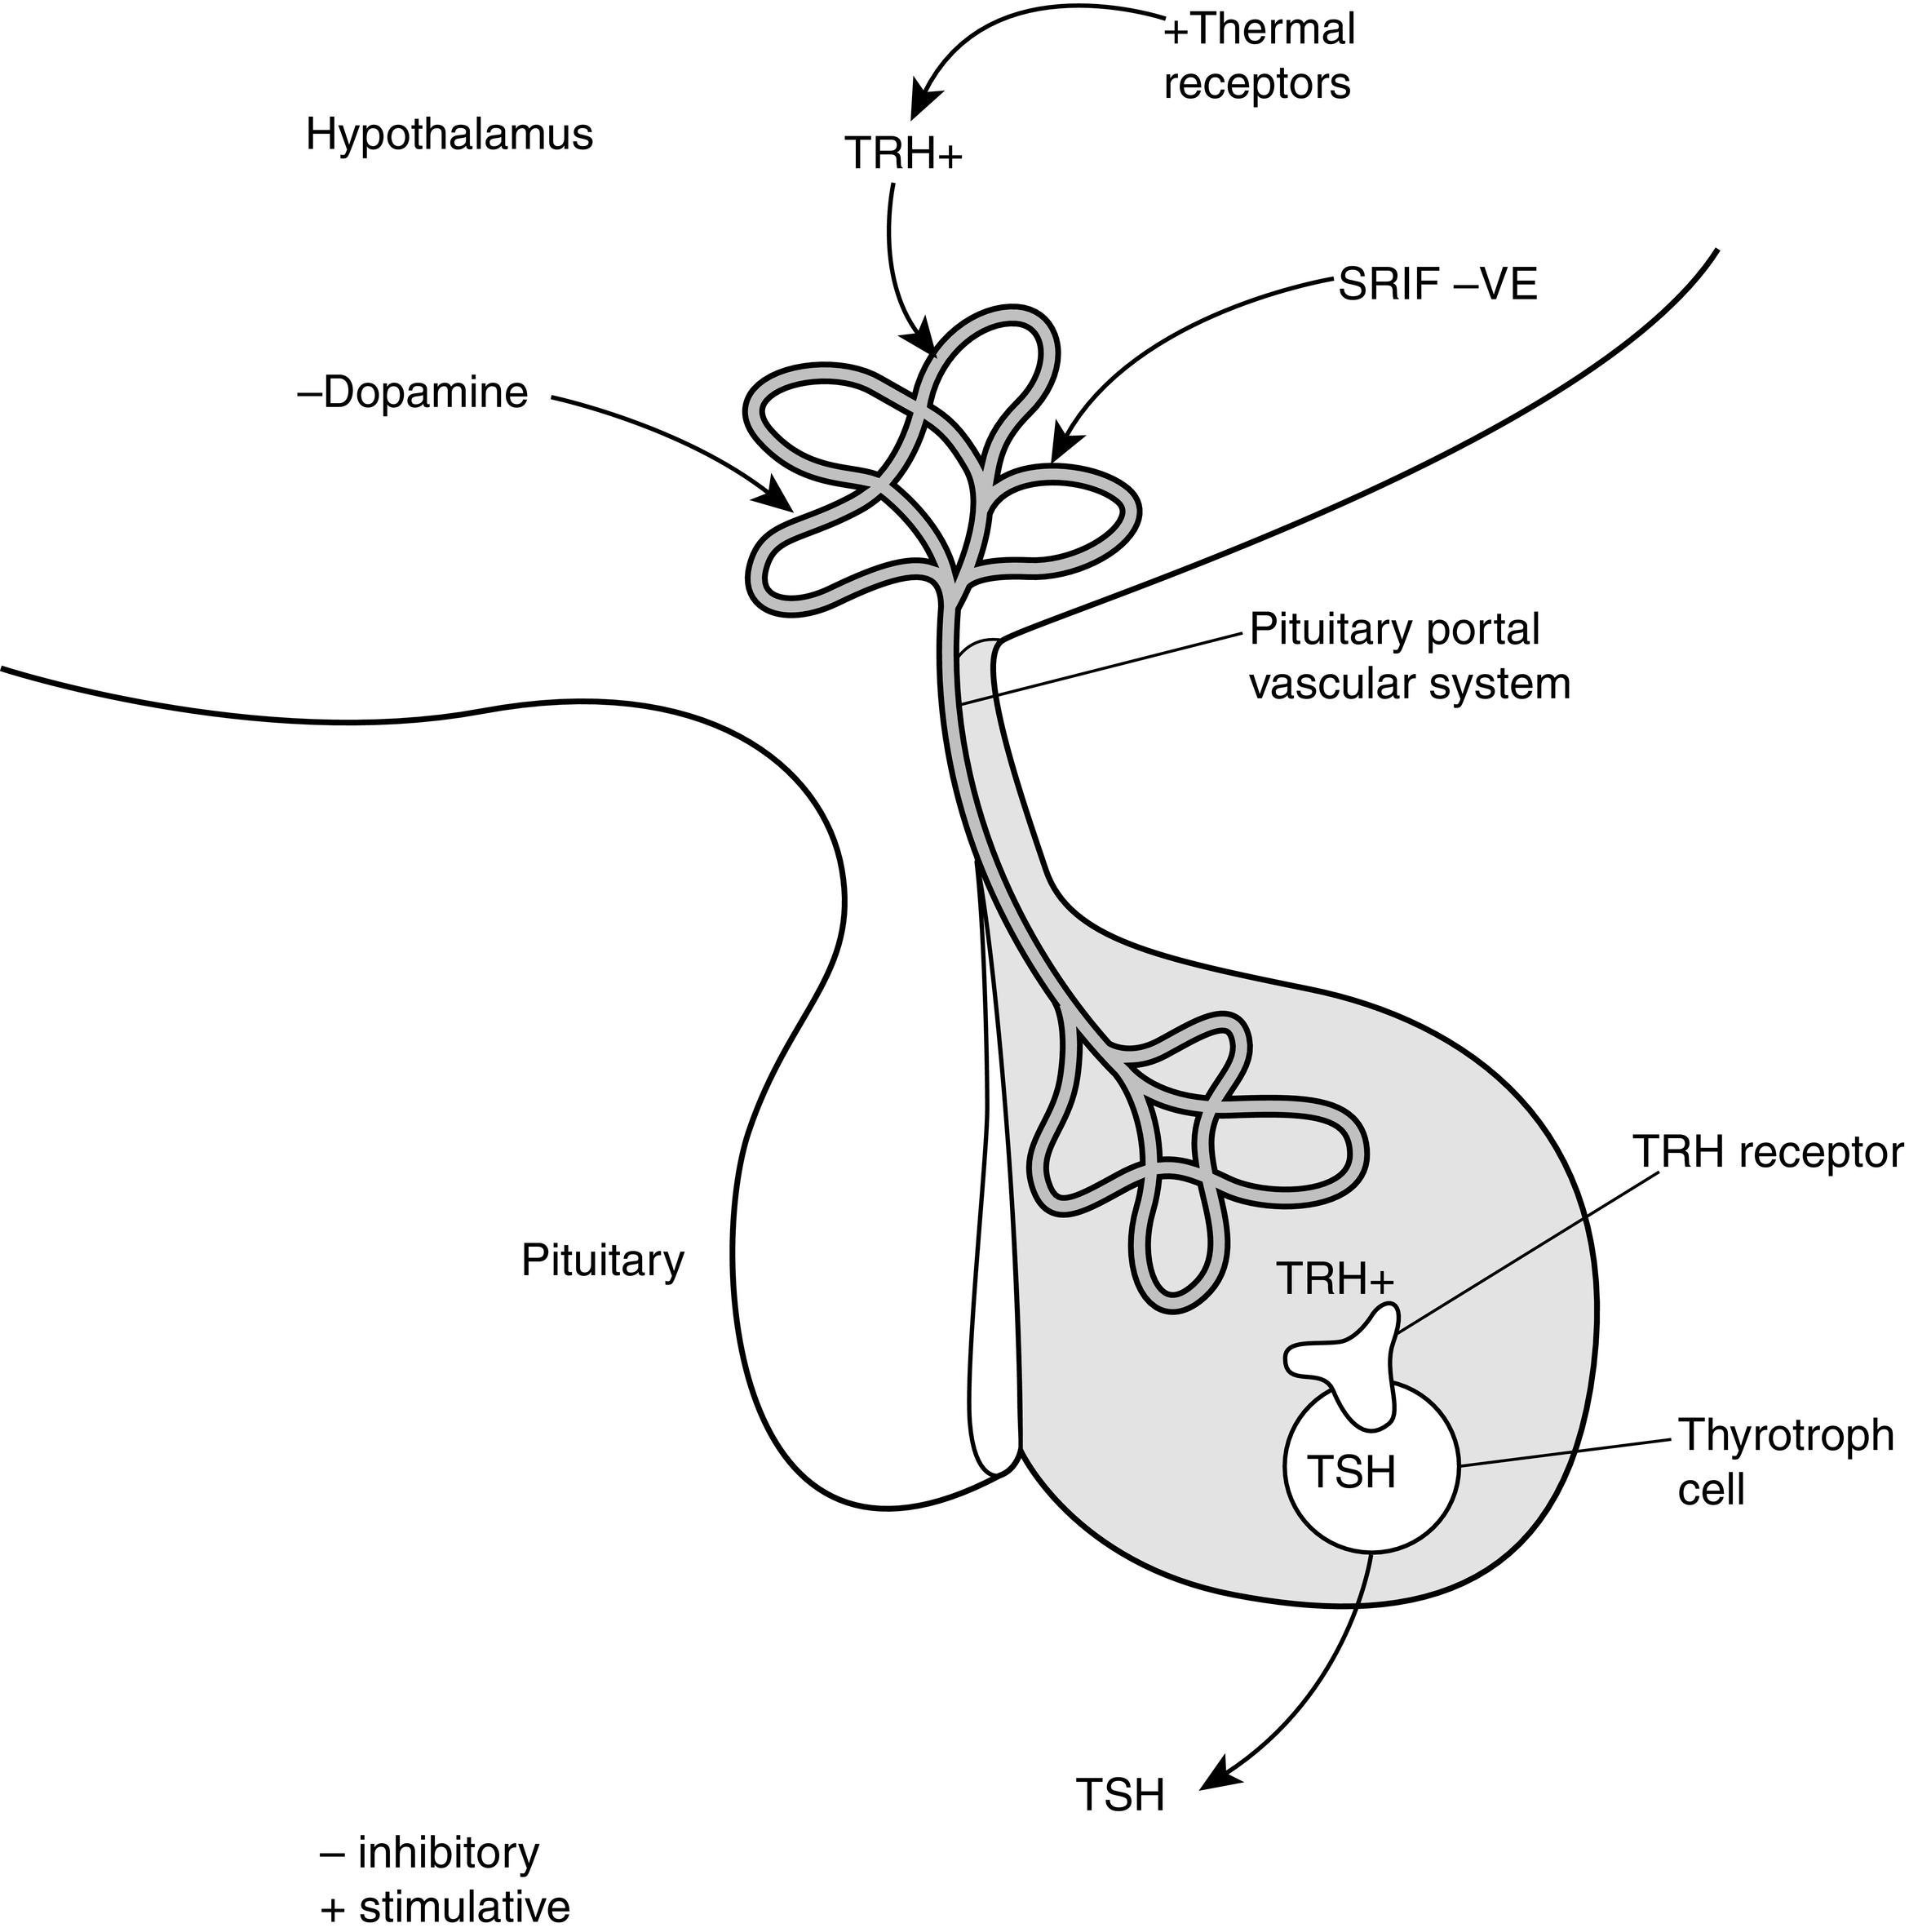 Fig. 13.3, The hypothalamic-pituitary thyroid-stimulating (TSH) axis. Thyrotropin-releasing hormone (TRH) secreted into the pituitary portal vascular system stimulates TSH synthesis and secretion from the pituitary thyrotroph cell. TRH secretion is modulated by central and peripheral thermal sensors. Dopamine or somatostatin (SRIF) can inhibit TSH release.